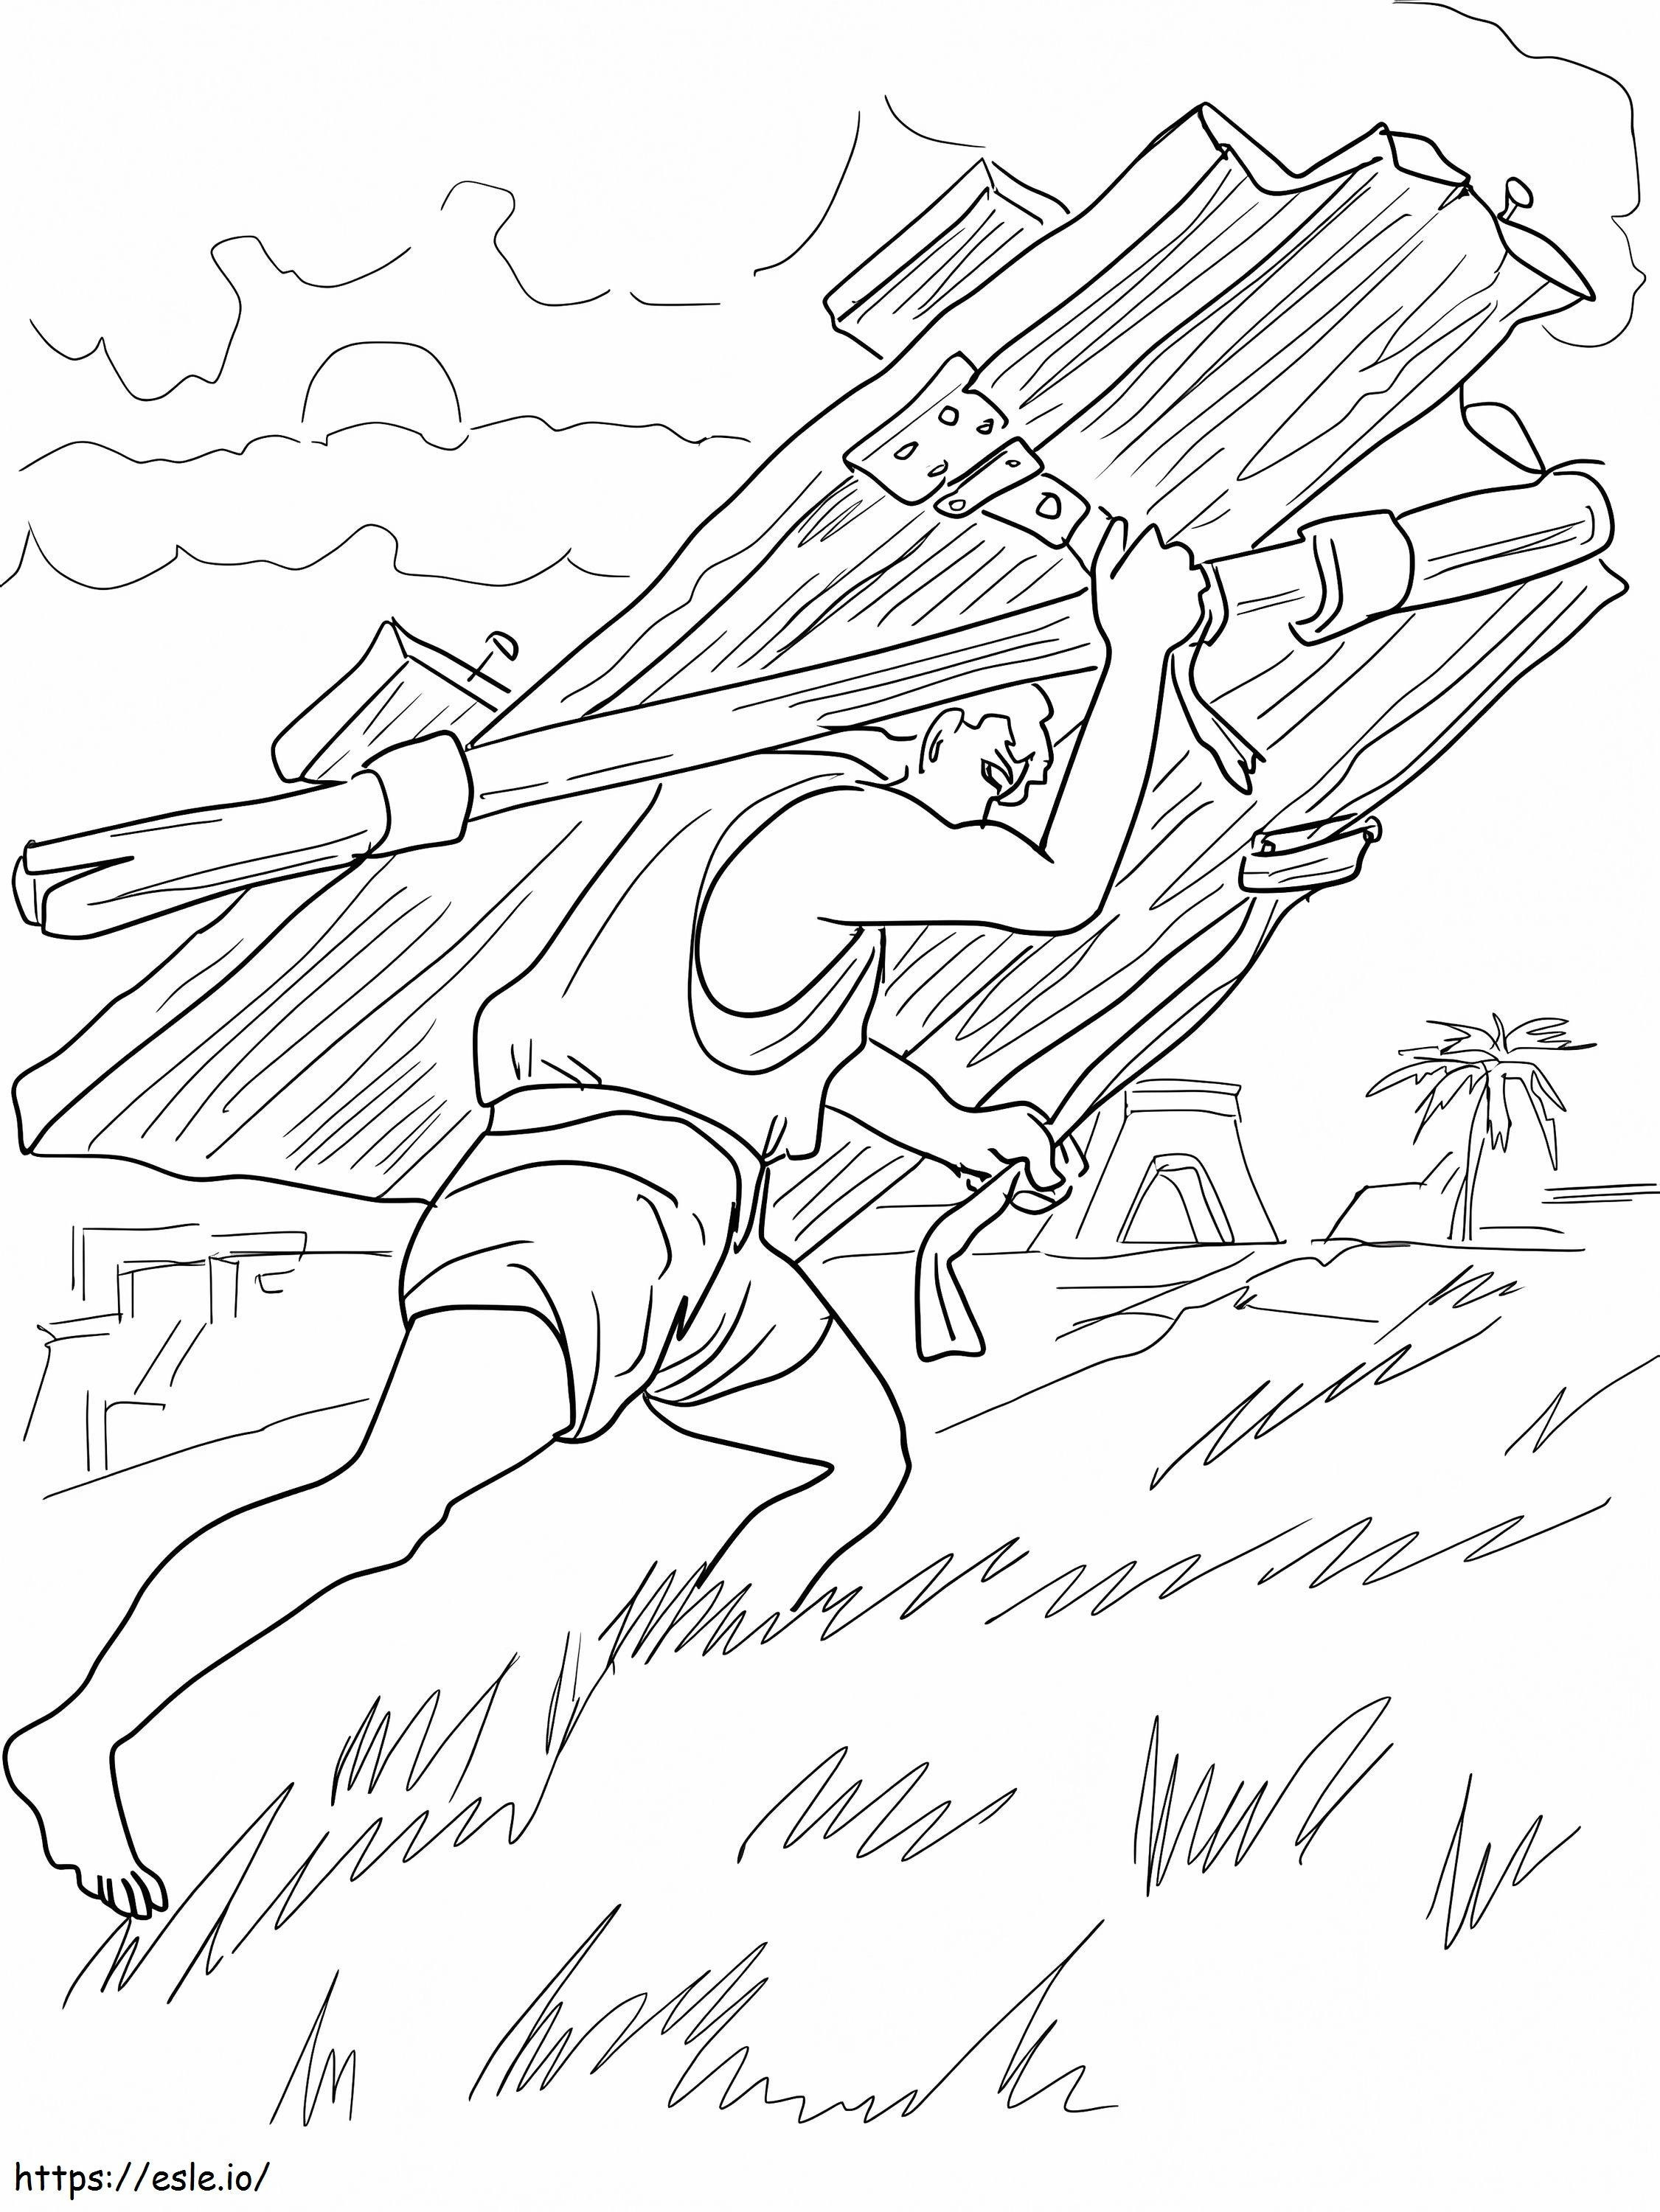 Samson Carries Gates Of Gaza coloring page